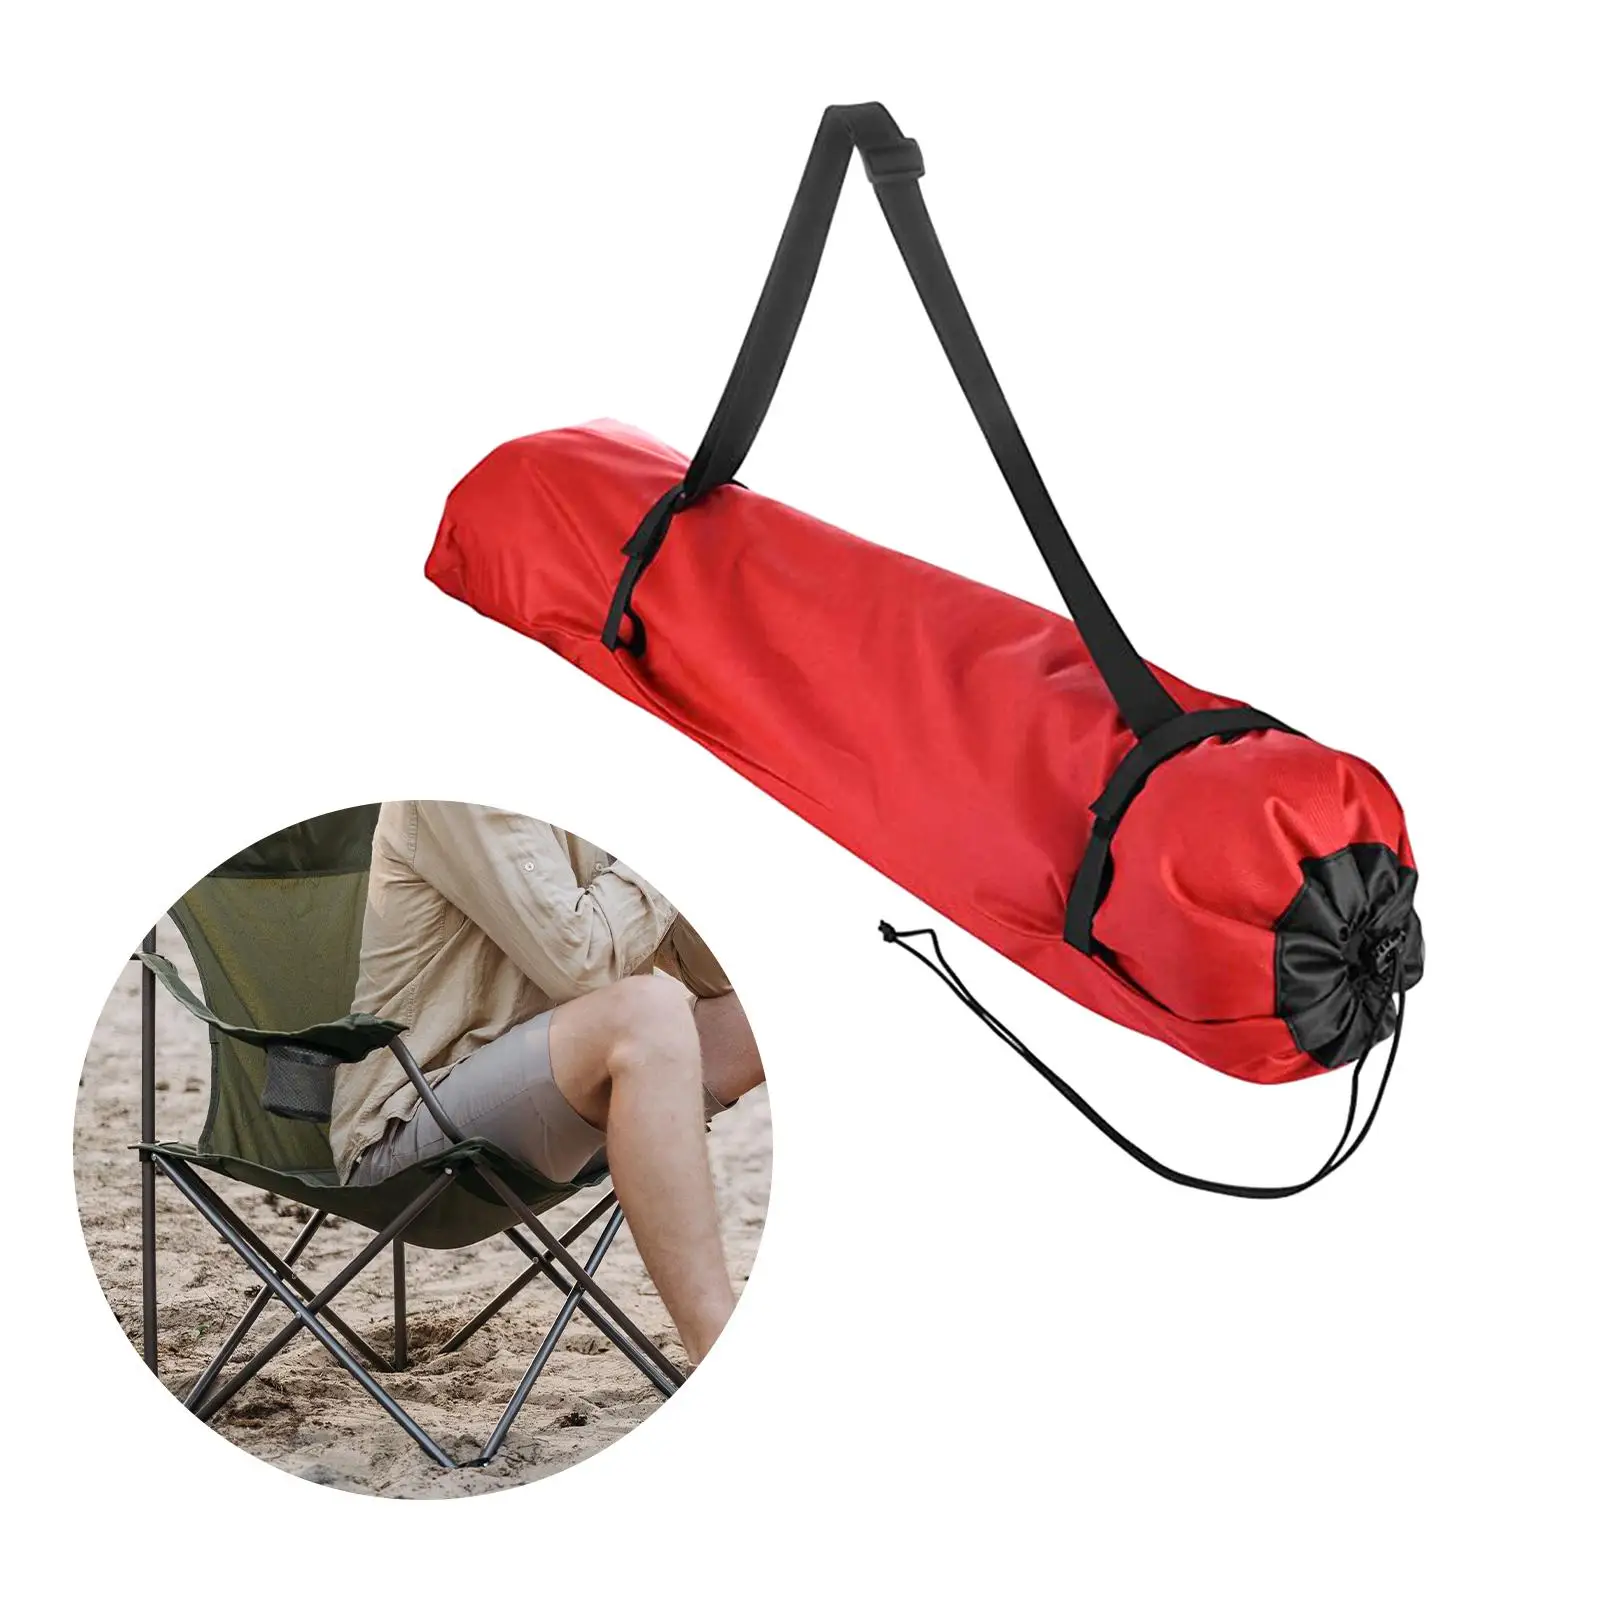 Camping Chair Bag Weekender Bag Lightweight Folding Chair Storage Bag Sundries Pouch for Backpacking Beach Fishing Travel Picnic